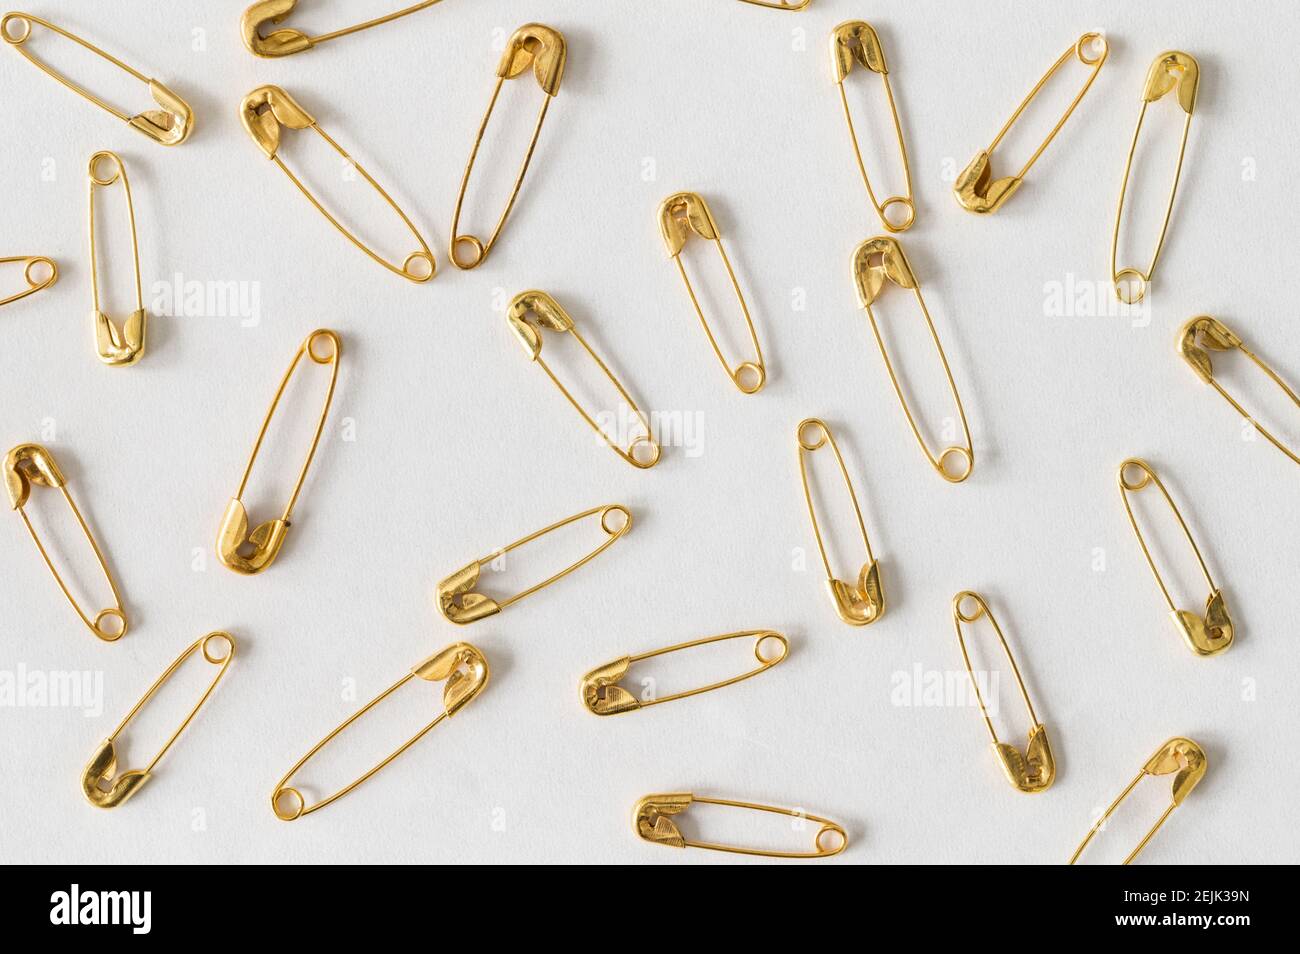 Free safety pin Photos & Pictures